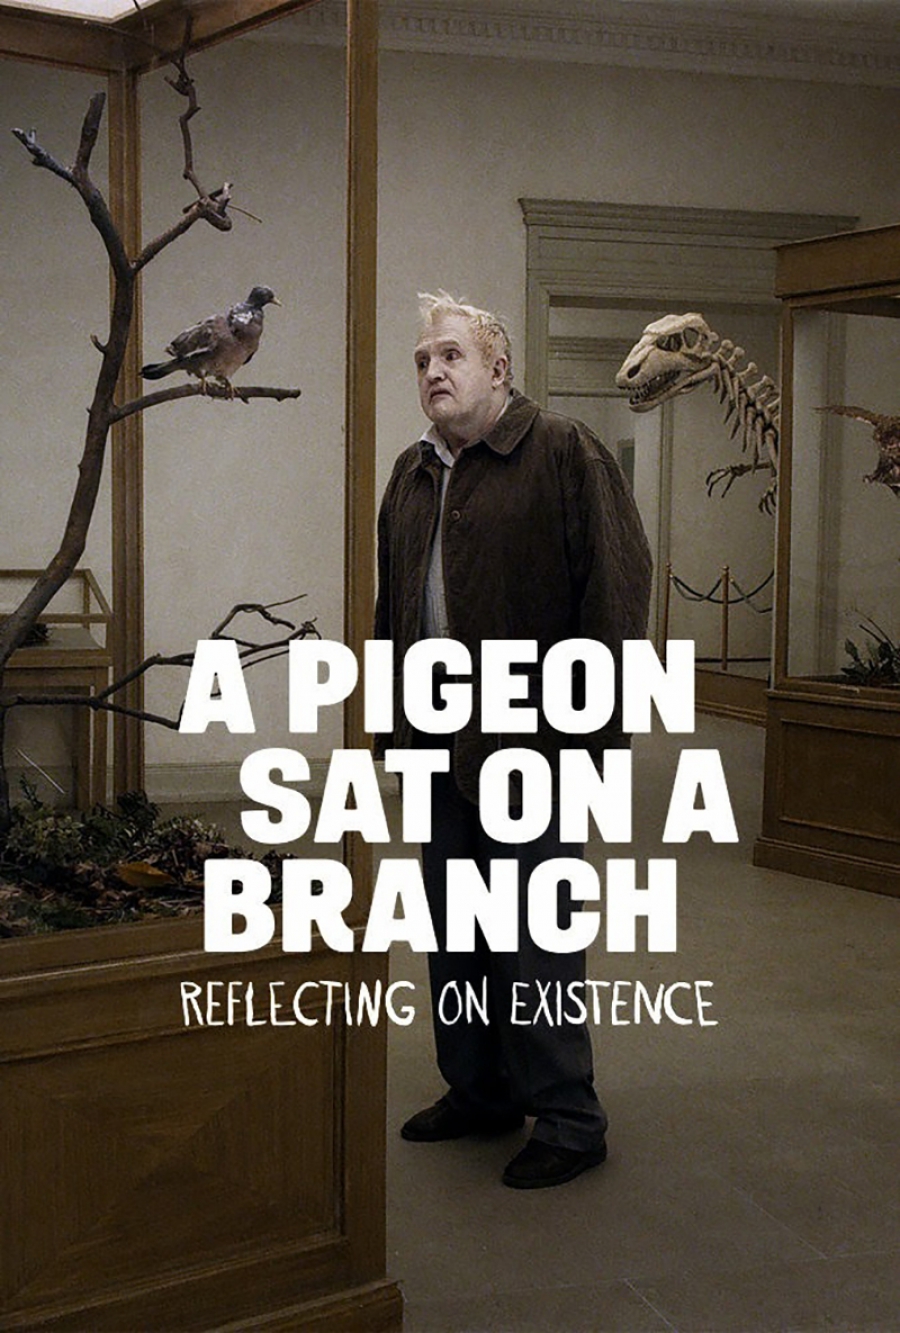 A pigeon sat on a branch reflecting on existence